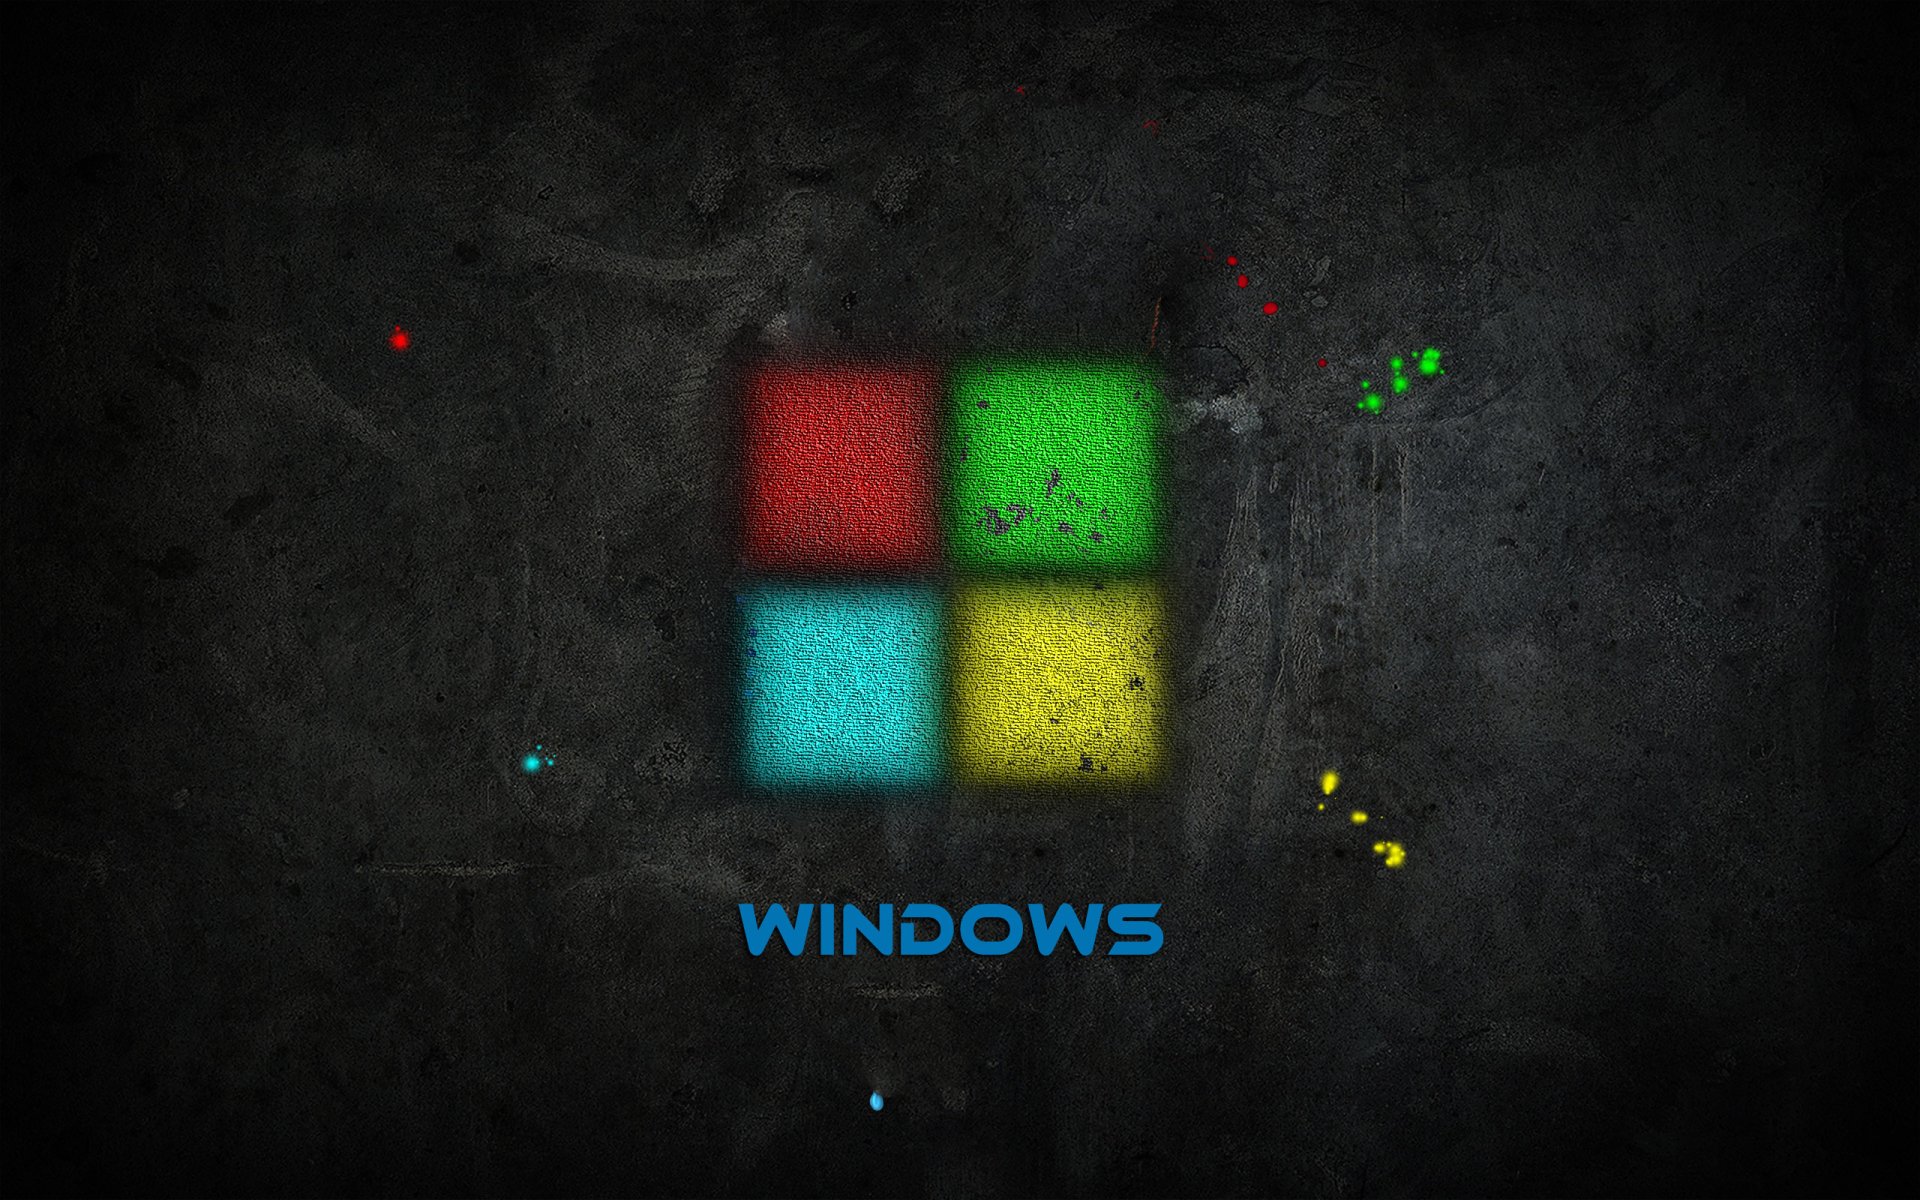 Your-Windows-Looks-Grungy by Rioter-M